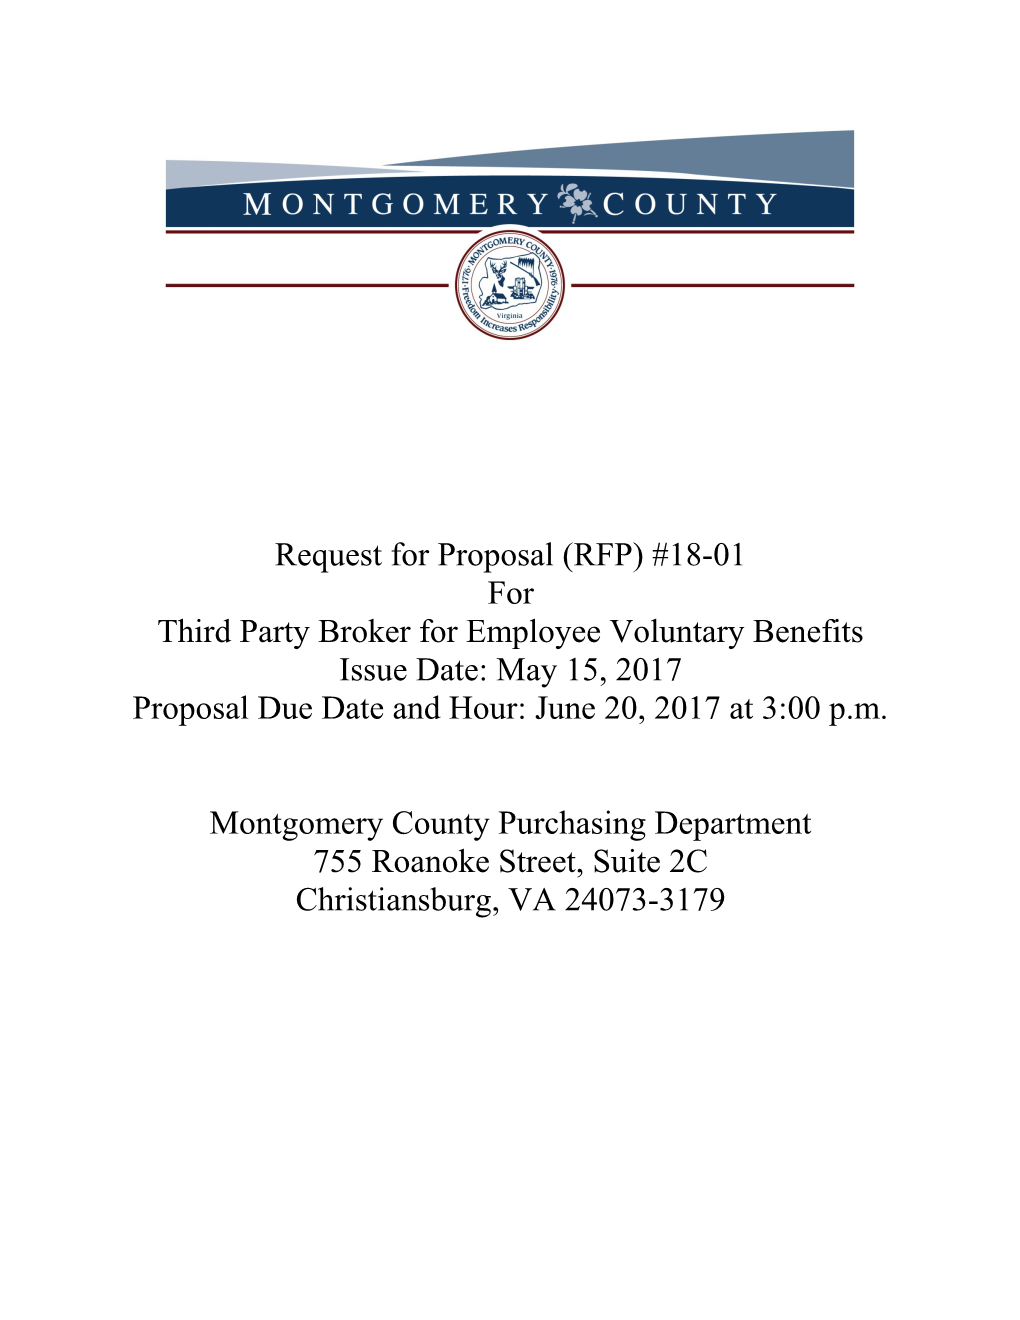 Third Party Broker for Employee Voluntary Benefits